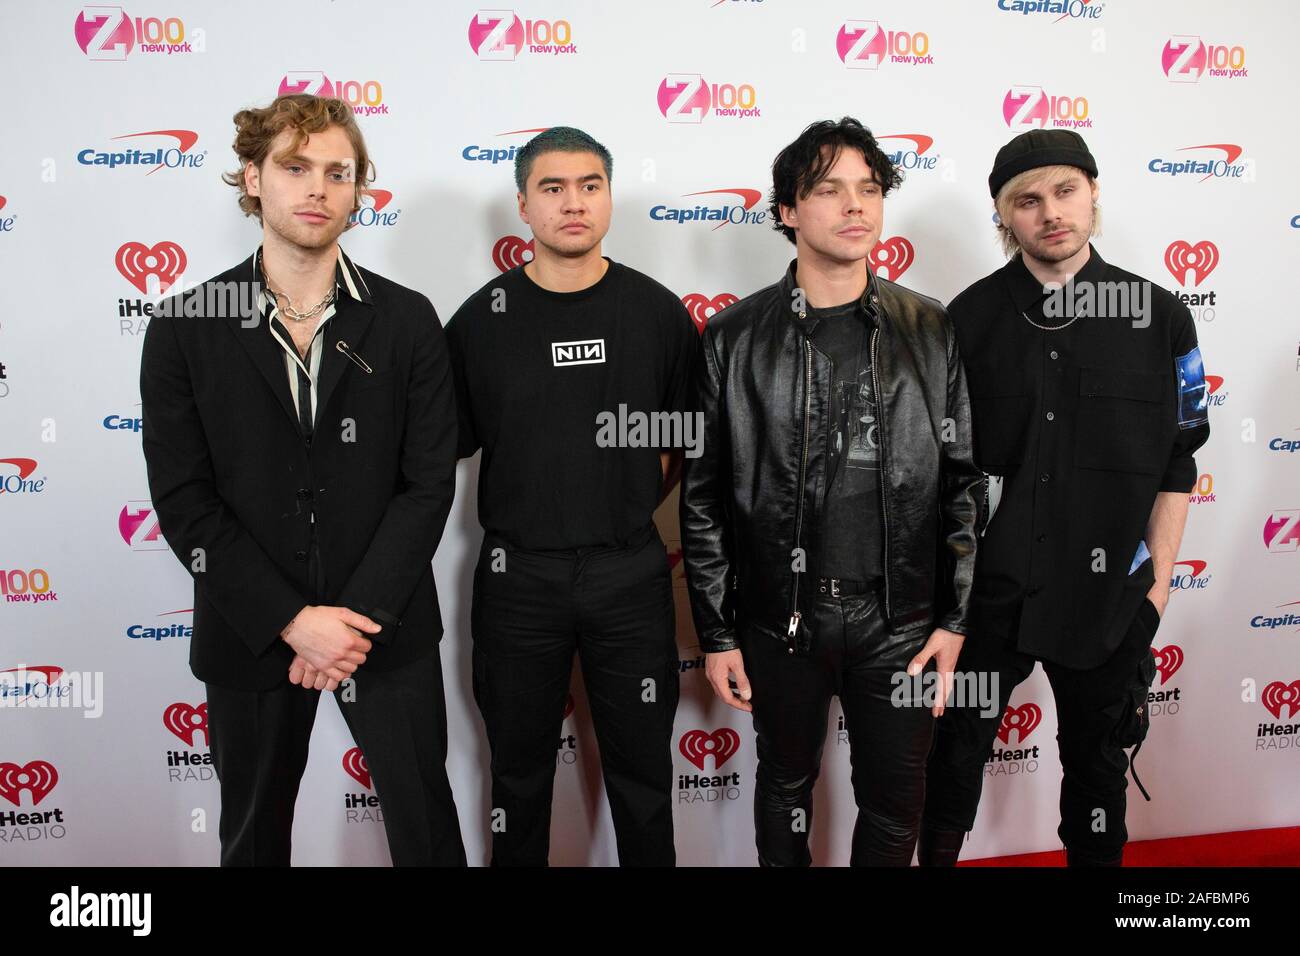 Musicians Luke Hemmings, Calum Hood, Ashton Irwin and Michael Clifford of 5 Seconds to Summer arrive at iHeartRadio's Z100 Jingle Ball 2019 at Madison Square Garden on December 13, 2019 in New York City, New York. Stock Photo